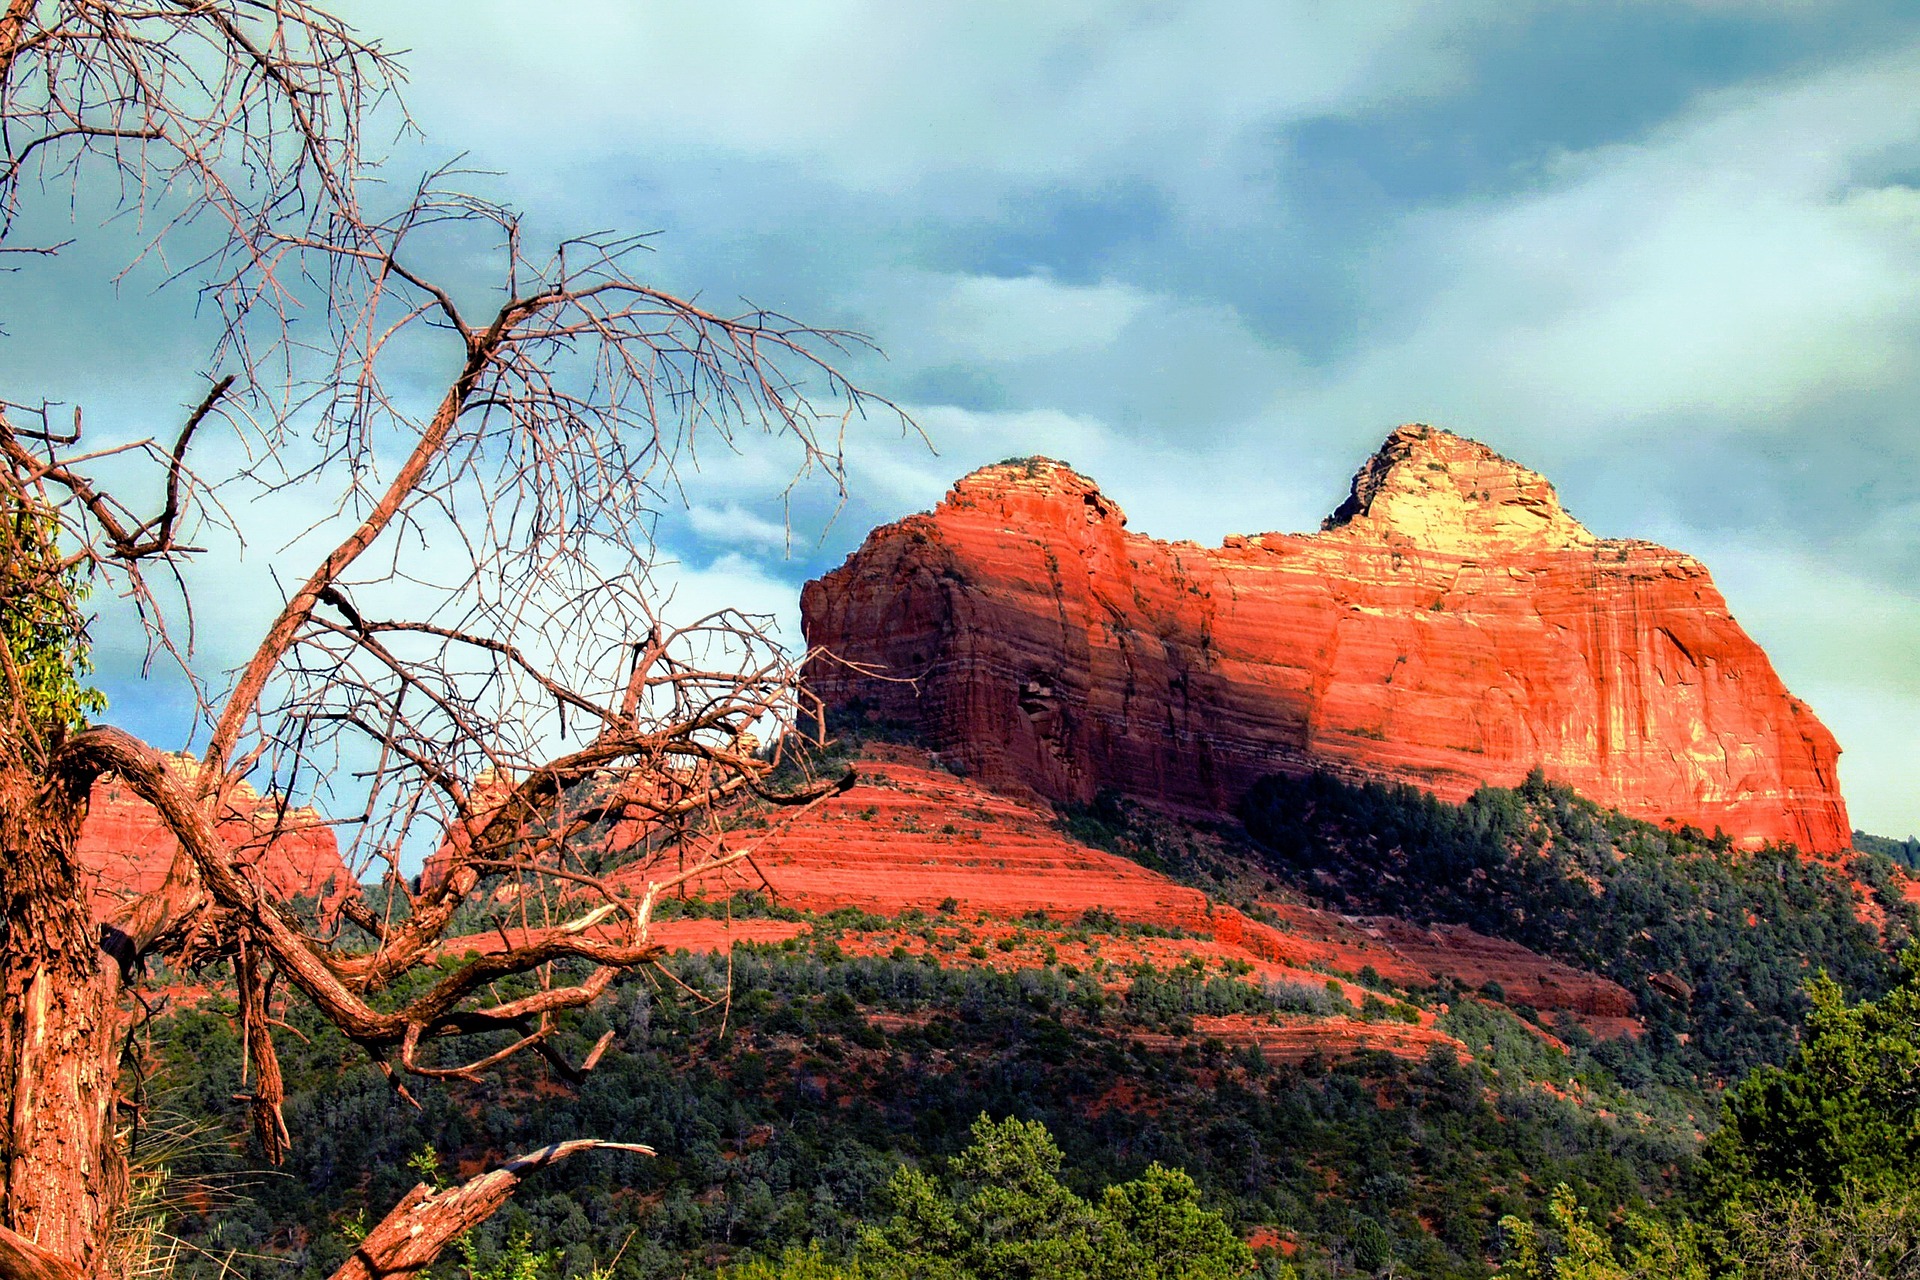 The view staying outside of Sedona hotel rooms